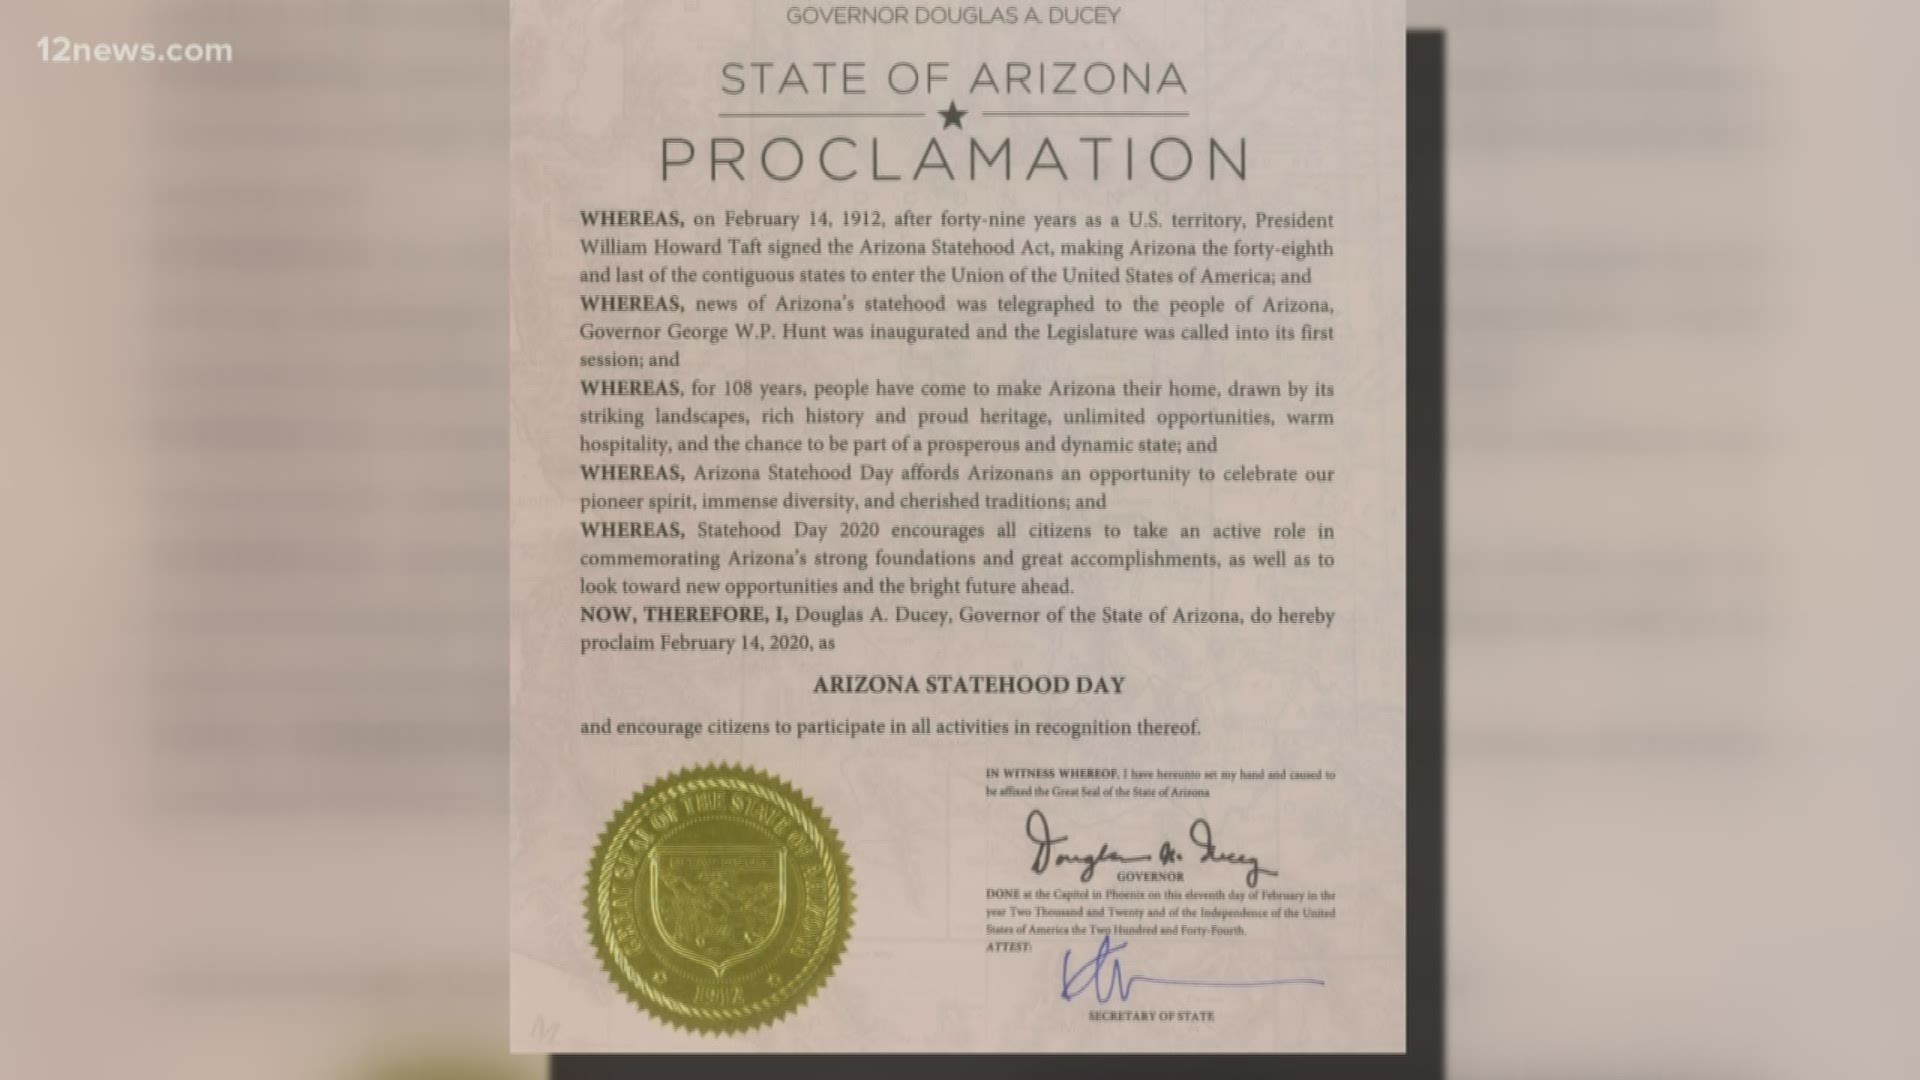 108 years ago President William H. Taft signed a bill that made Arizona the 48th state in the Union. Arizona was added just before Alaska and Hawaii in 1959.